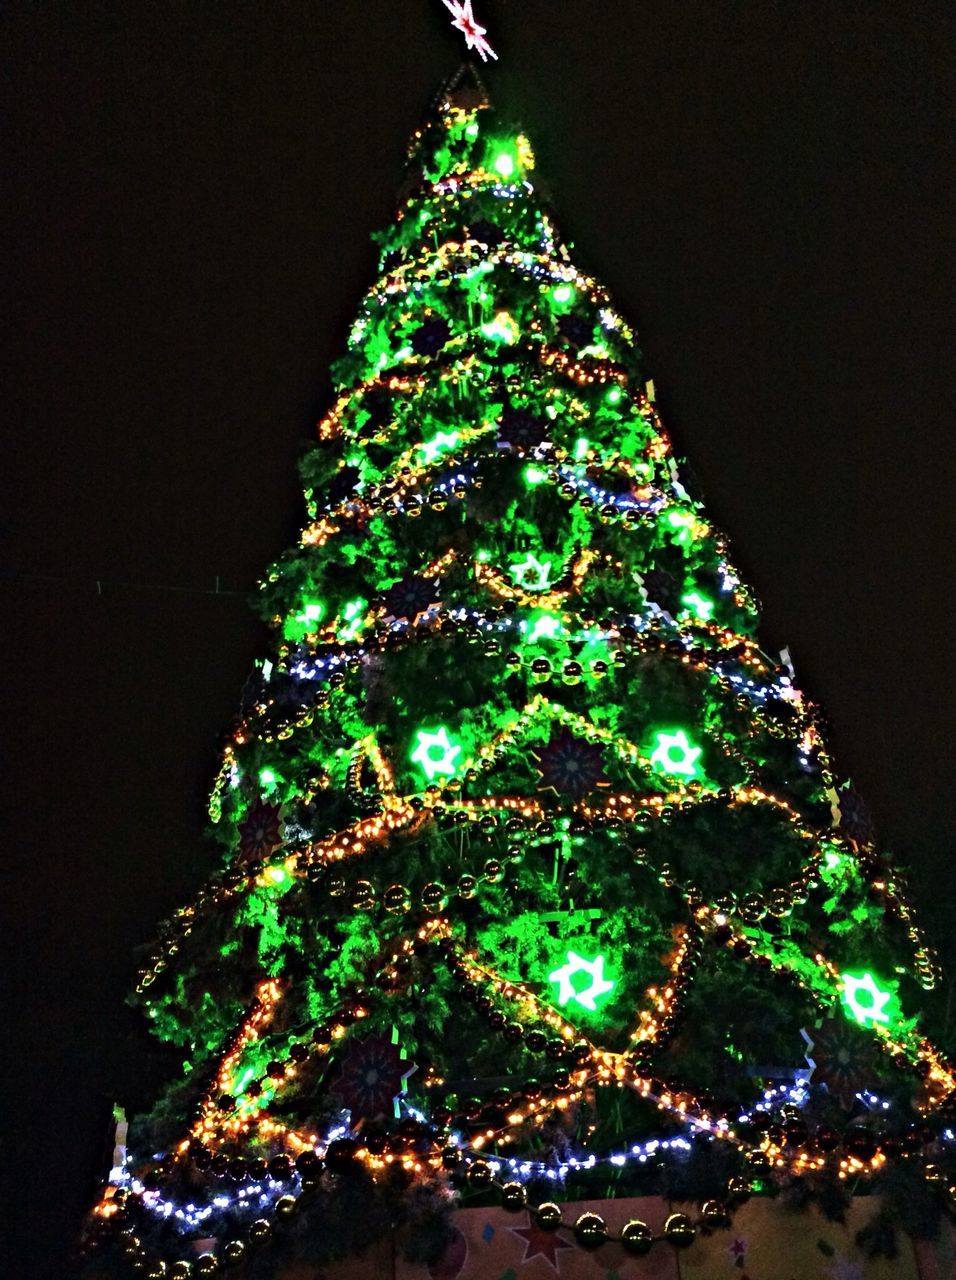 night, low angle view, tree, illuminated, growth, branch, decoration, lighting equipment, green color, christmas decoration, christmas, nature, clear sky, christmas tree, celebration, outdoors, no people, beauty in nature, hanging, light - natural phenomenon